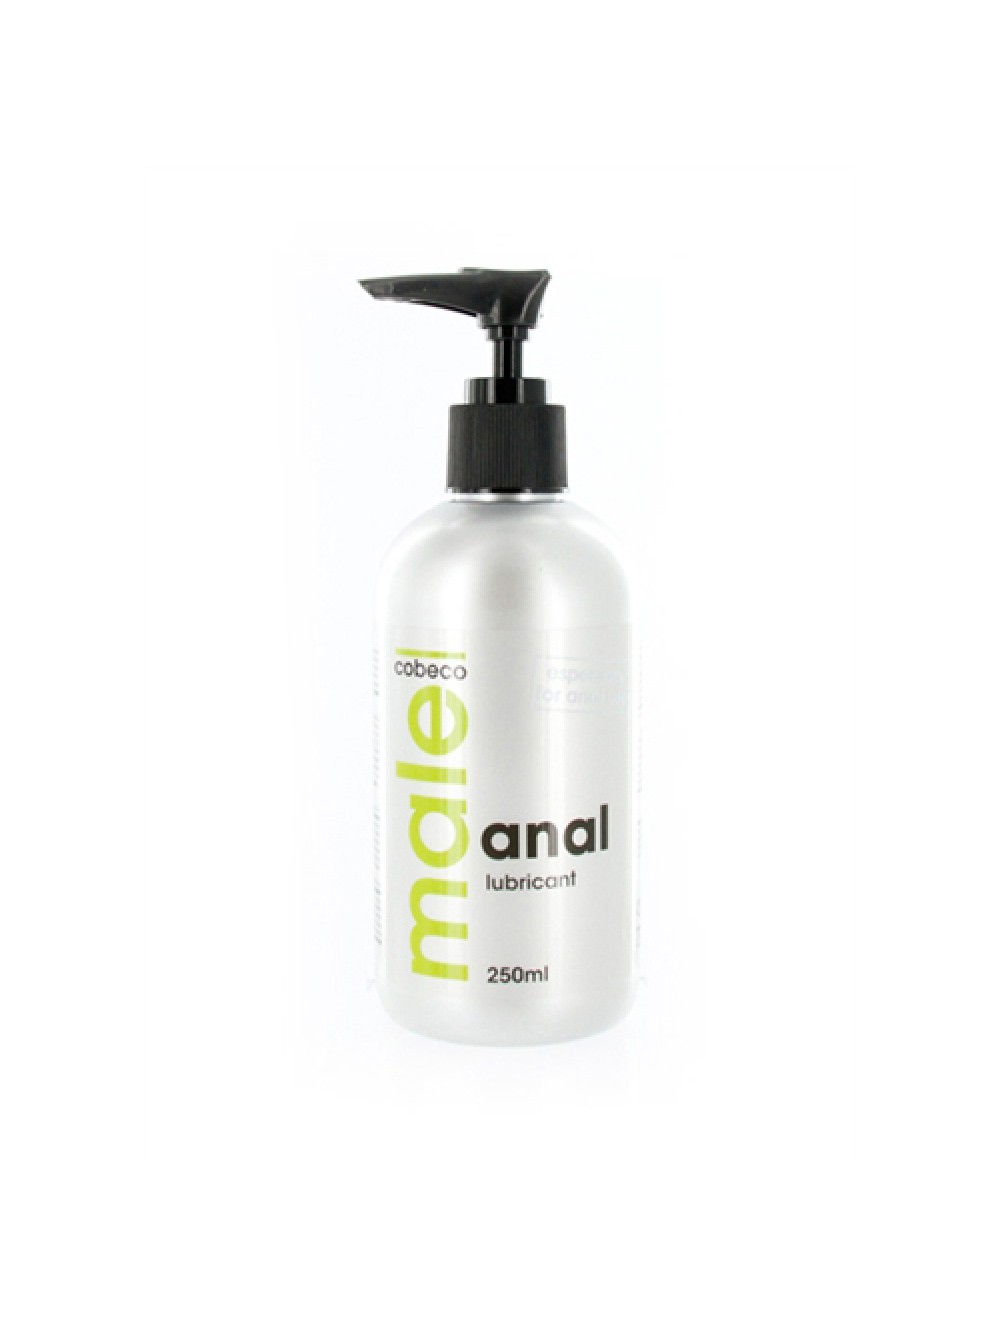 MALE - Anal Lubricant (250ml) 8717344178709